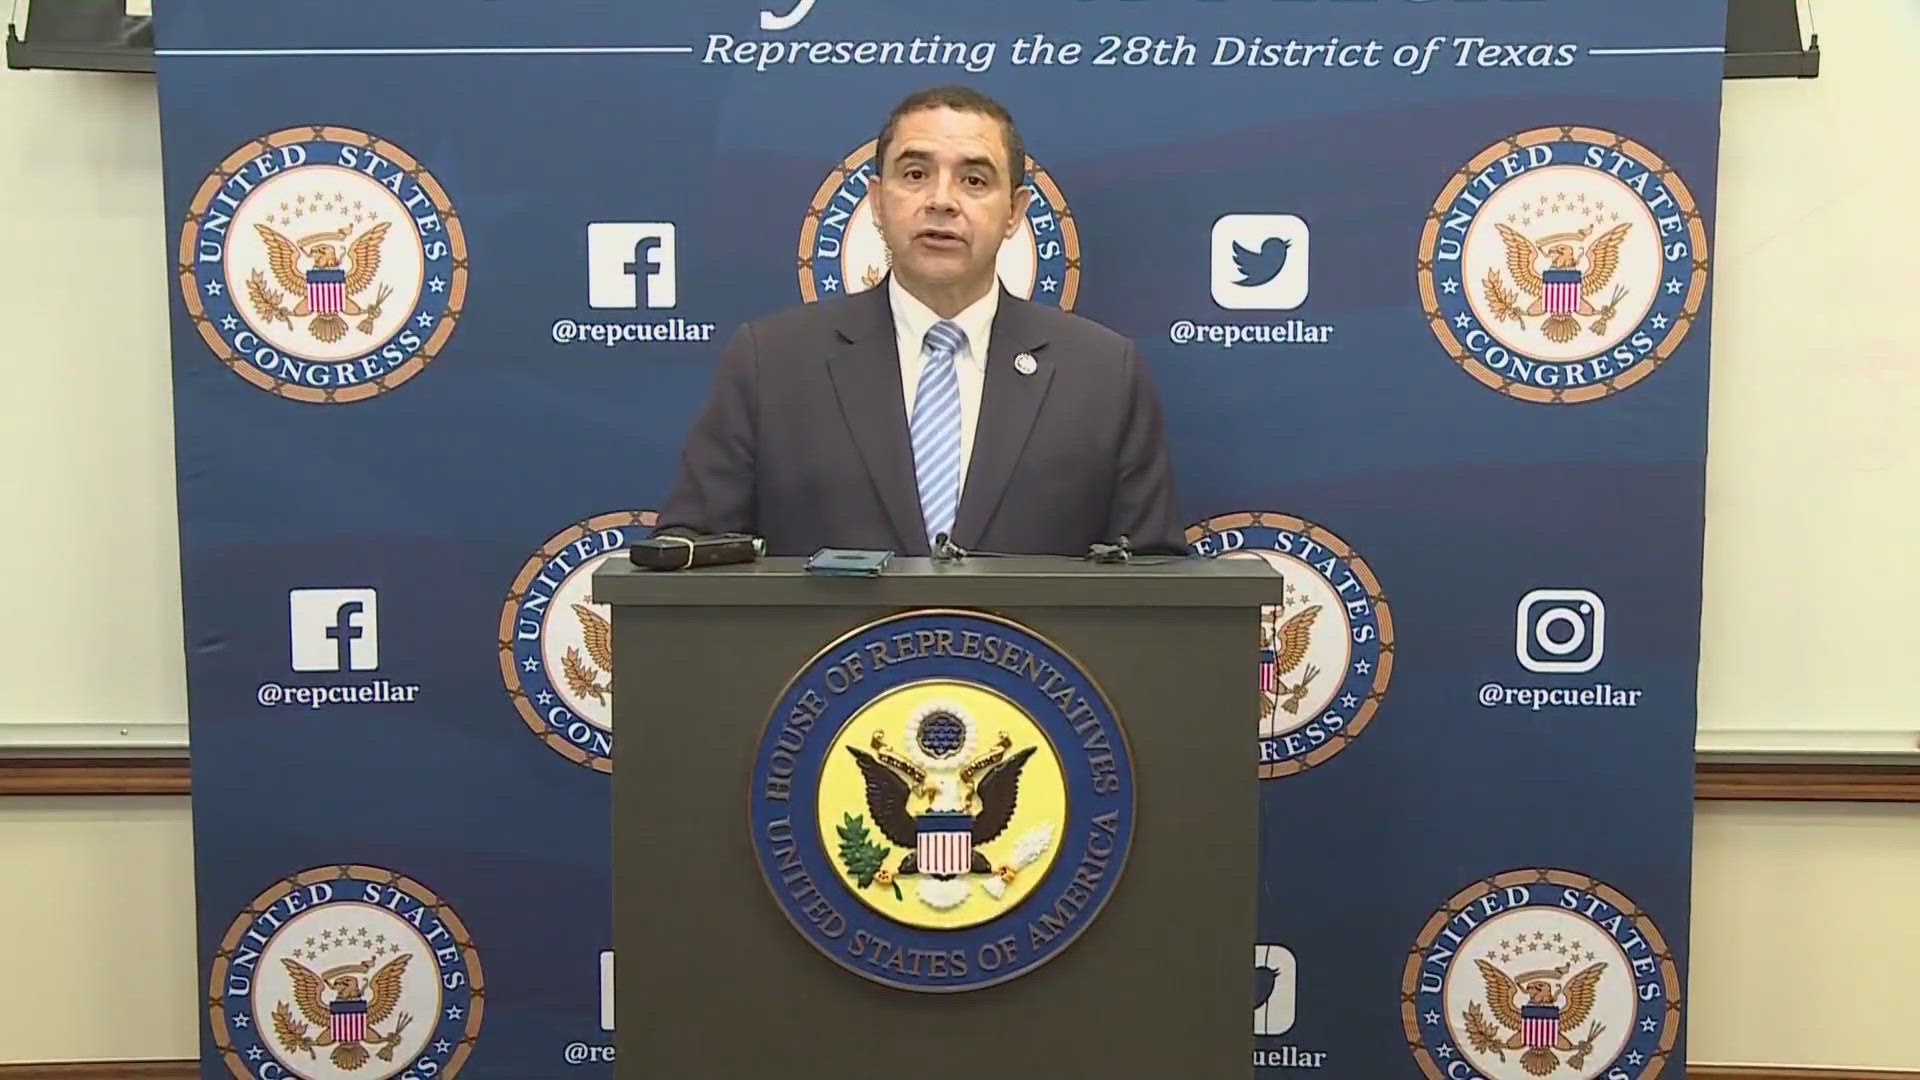 Congressman Henry Cuellar facing backlash from republican challengers after indictment